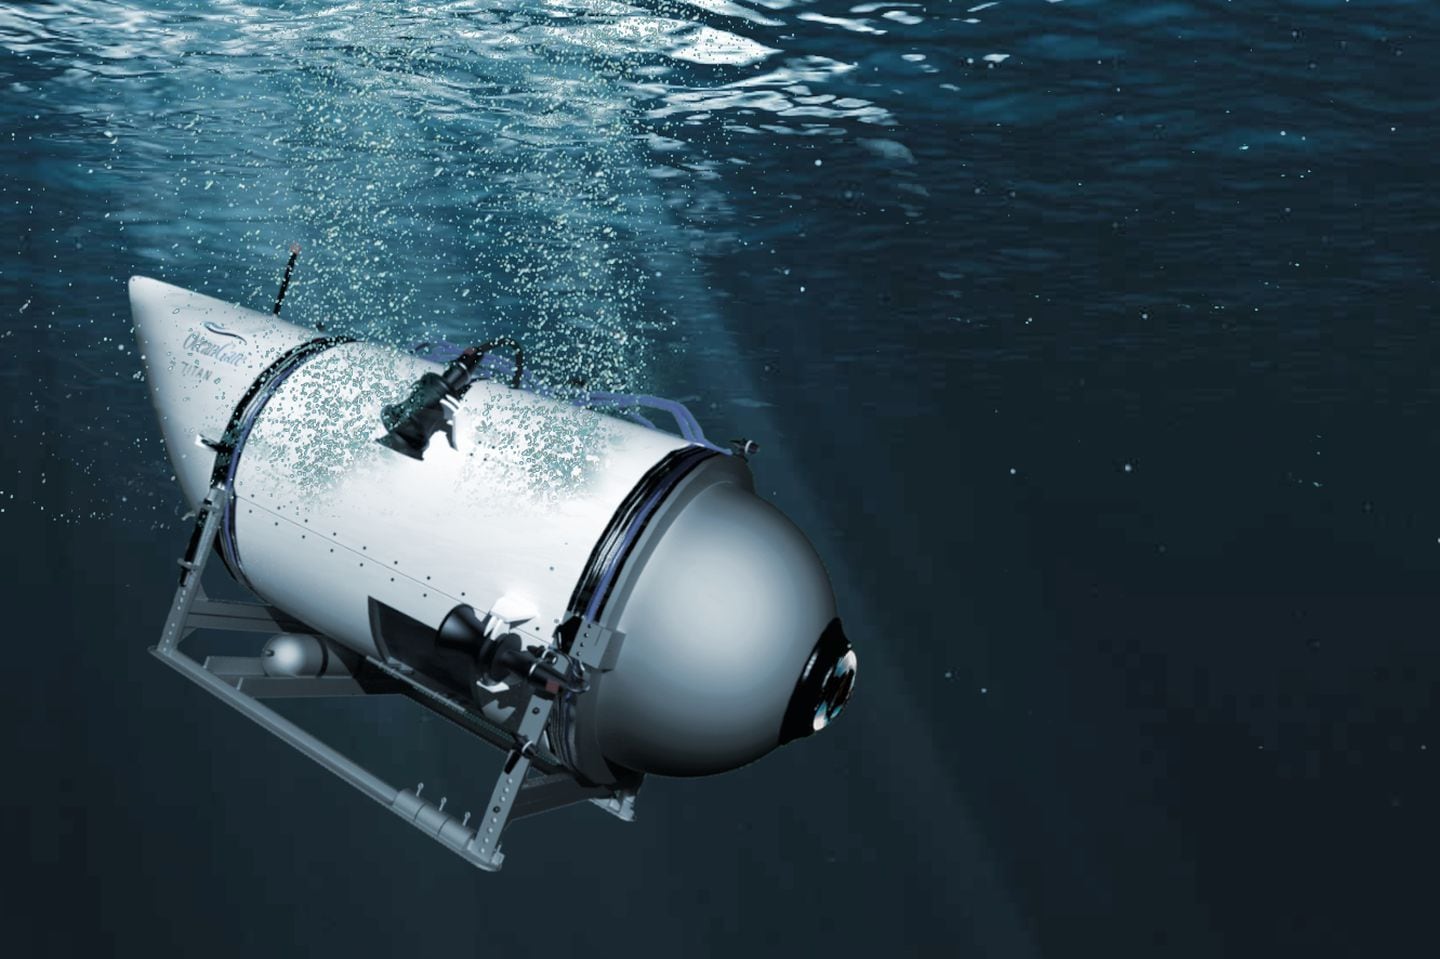 A 3-D model of the Titan submersible.